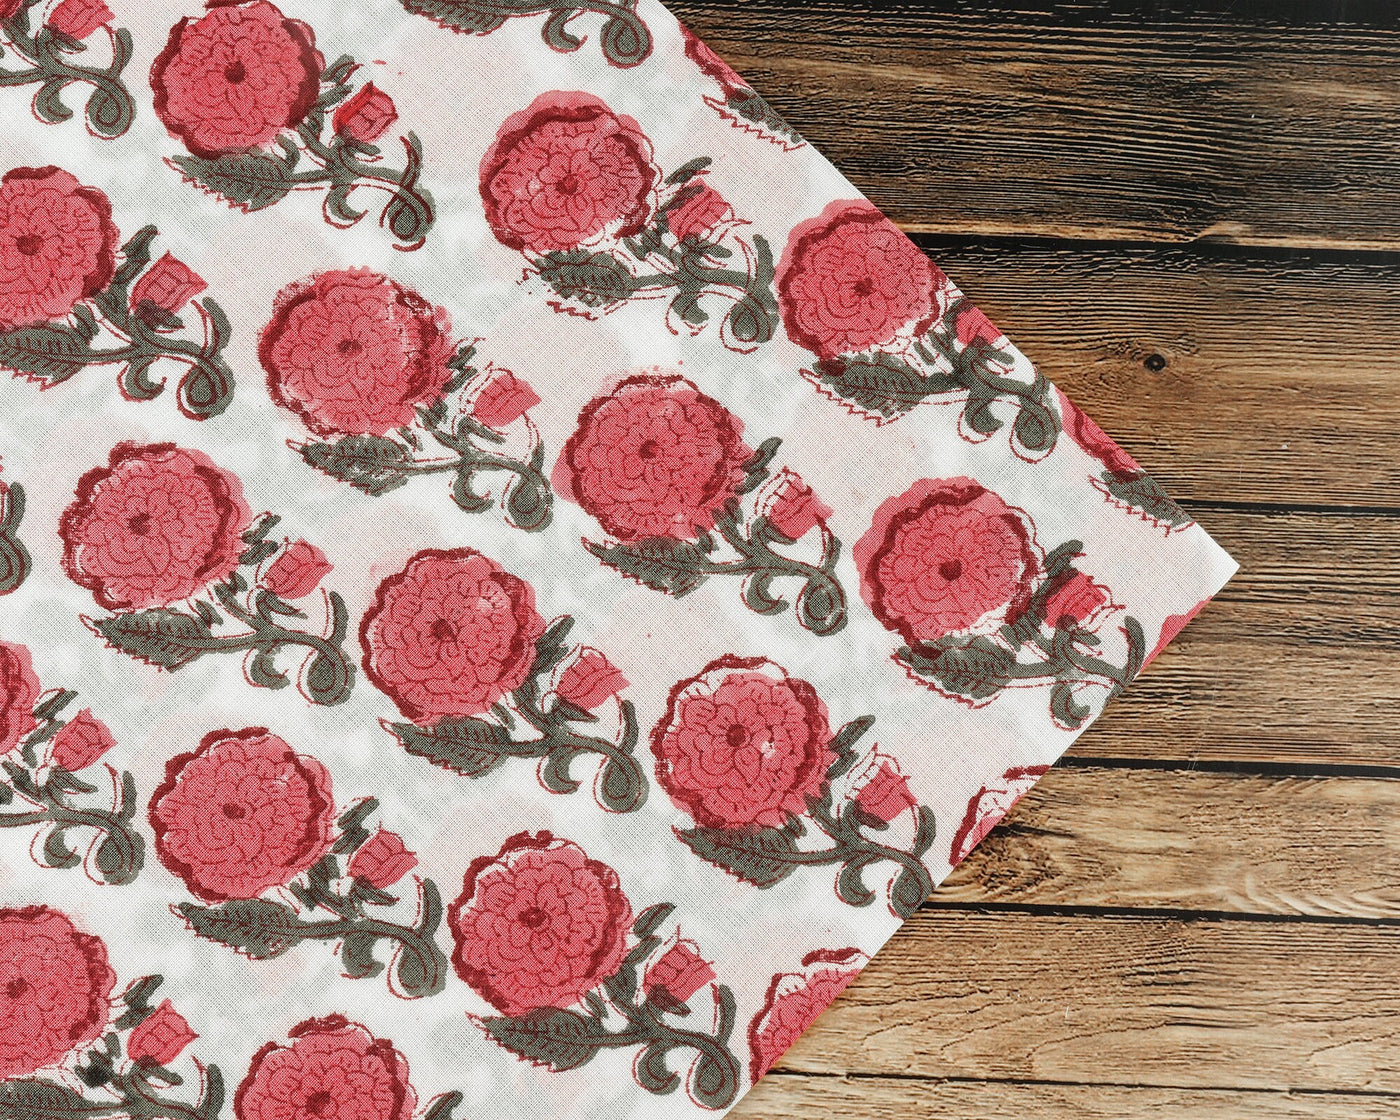 Raspberry Red, Army Green Indian Floral Hand Block Printed 100% Pure Cotton Cloth Napkins, 18x18"- Cocktail Napkin, 20x20"- Dinner Napkins